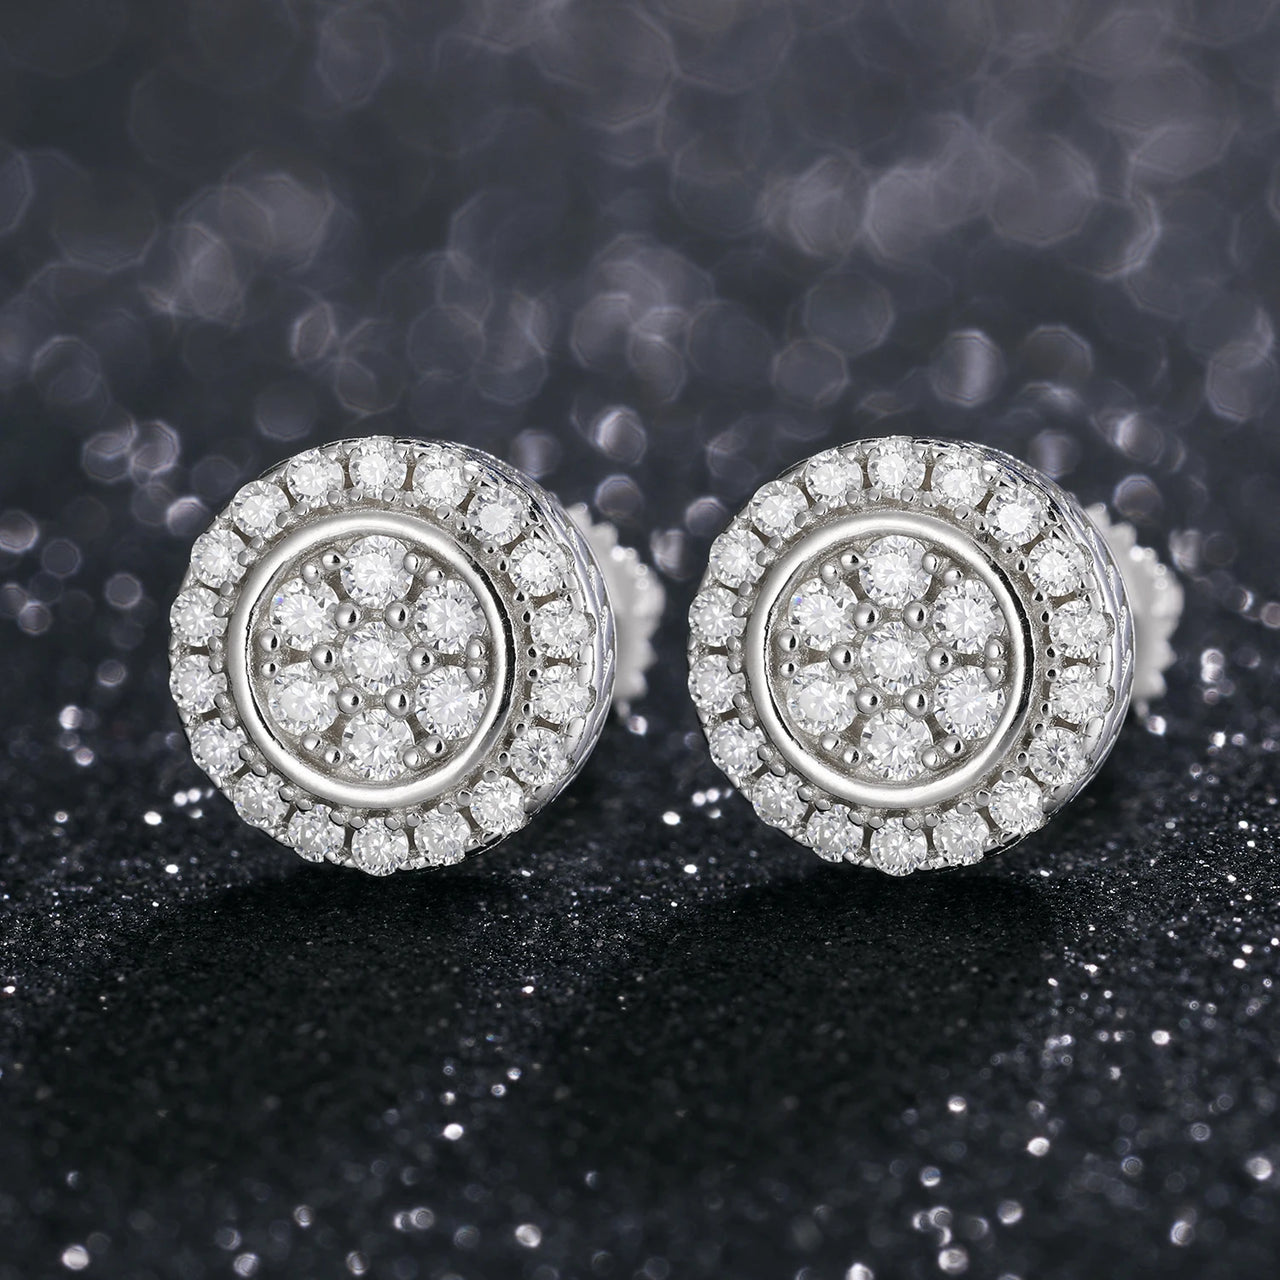 10mm S925 Moissanite Round Cut Stud Earrings - Different Drips